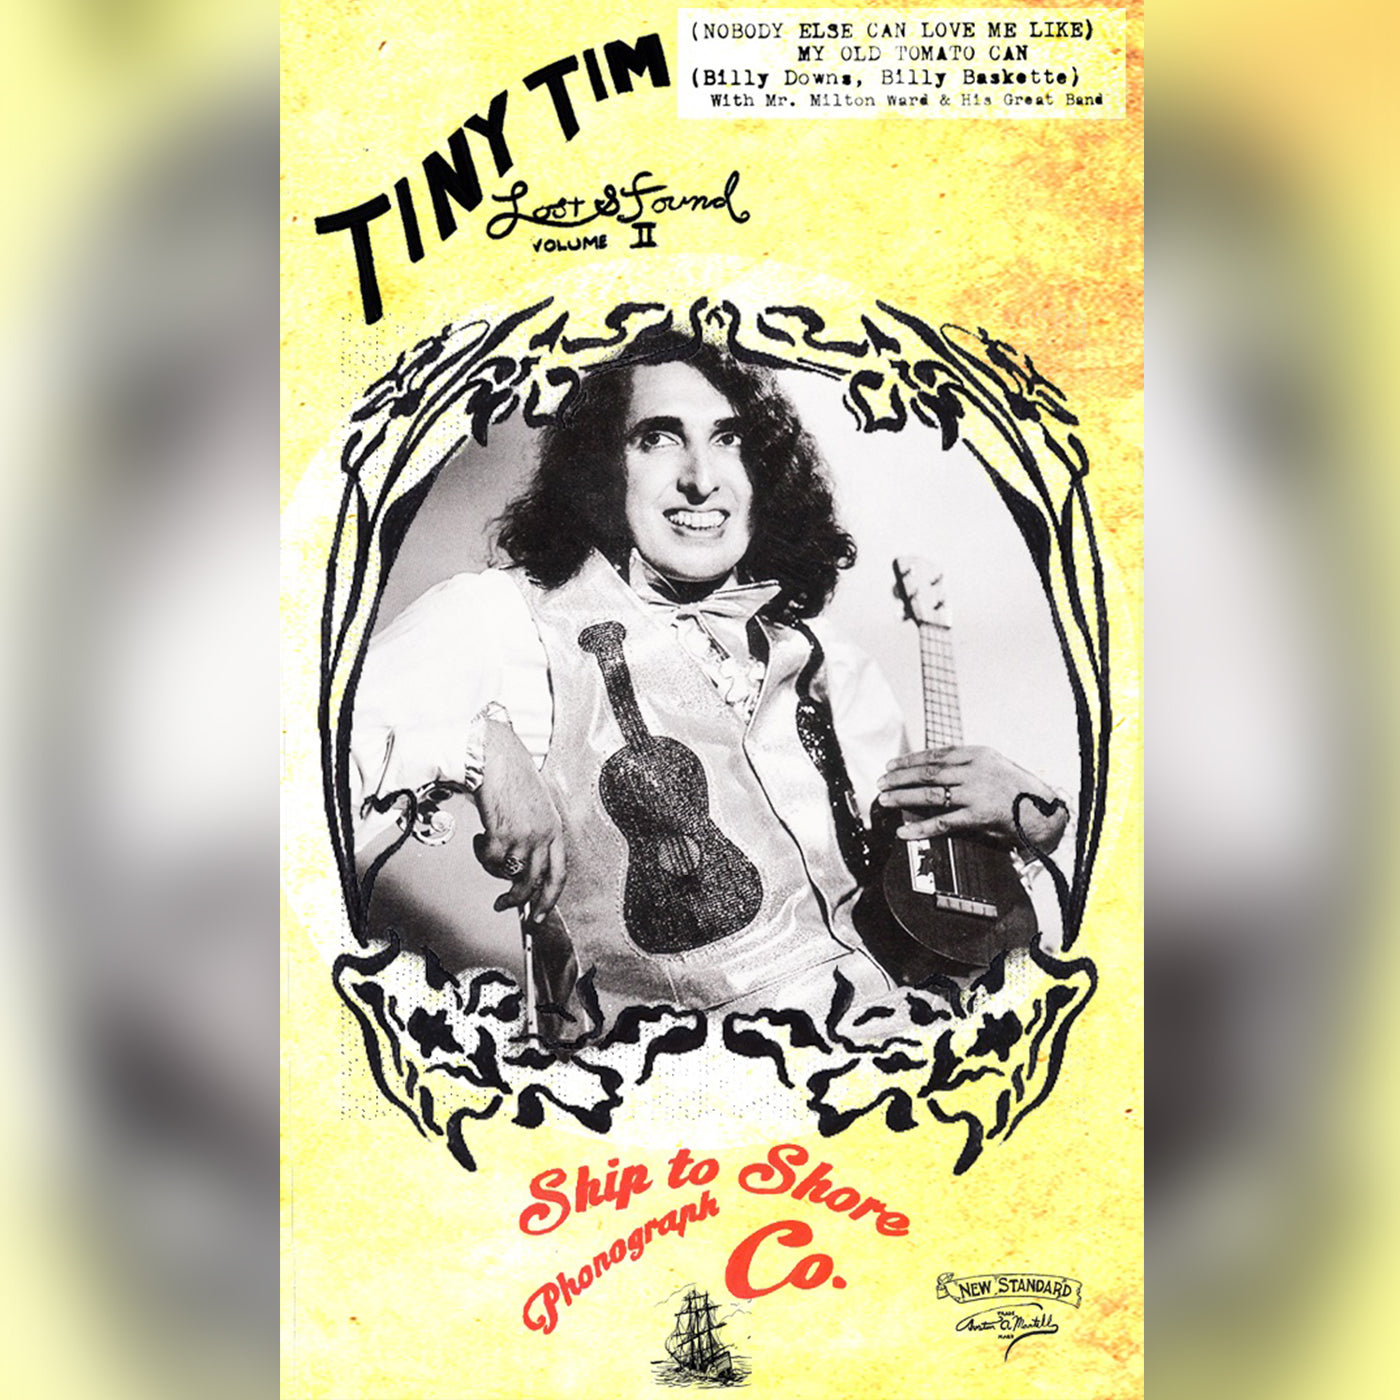 Tiny Tim - (Nobody Else Can Love Me Like) My Tomato Can - Ship to